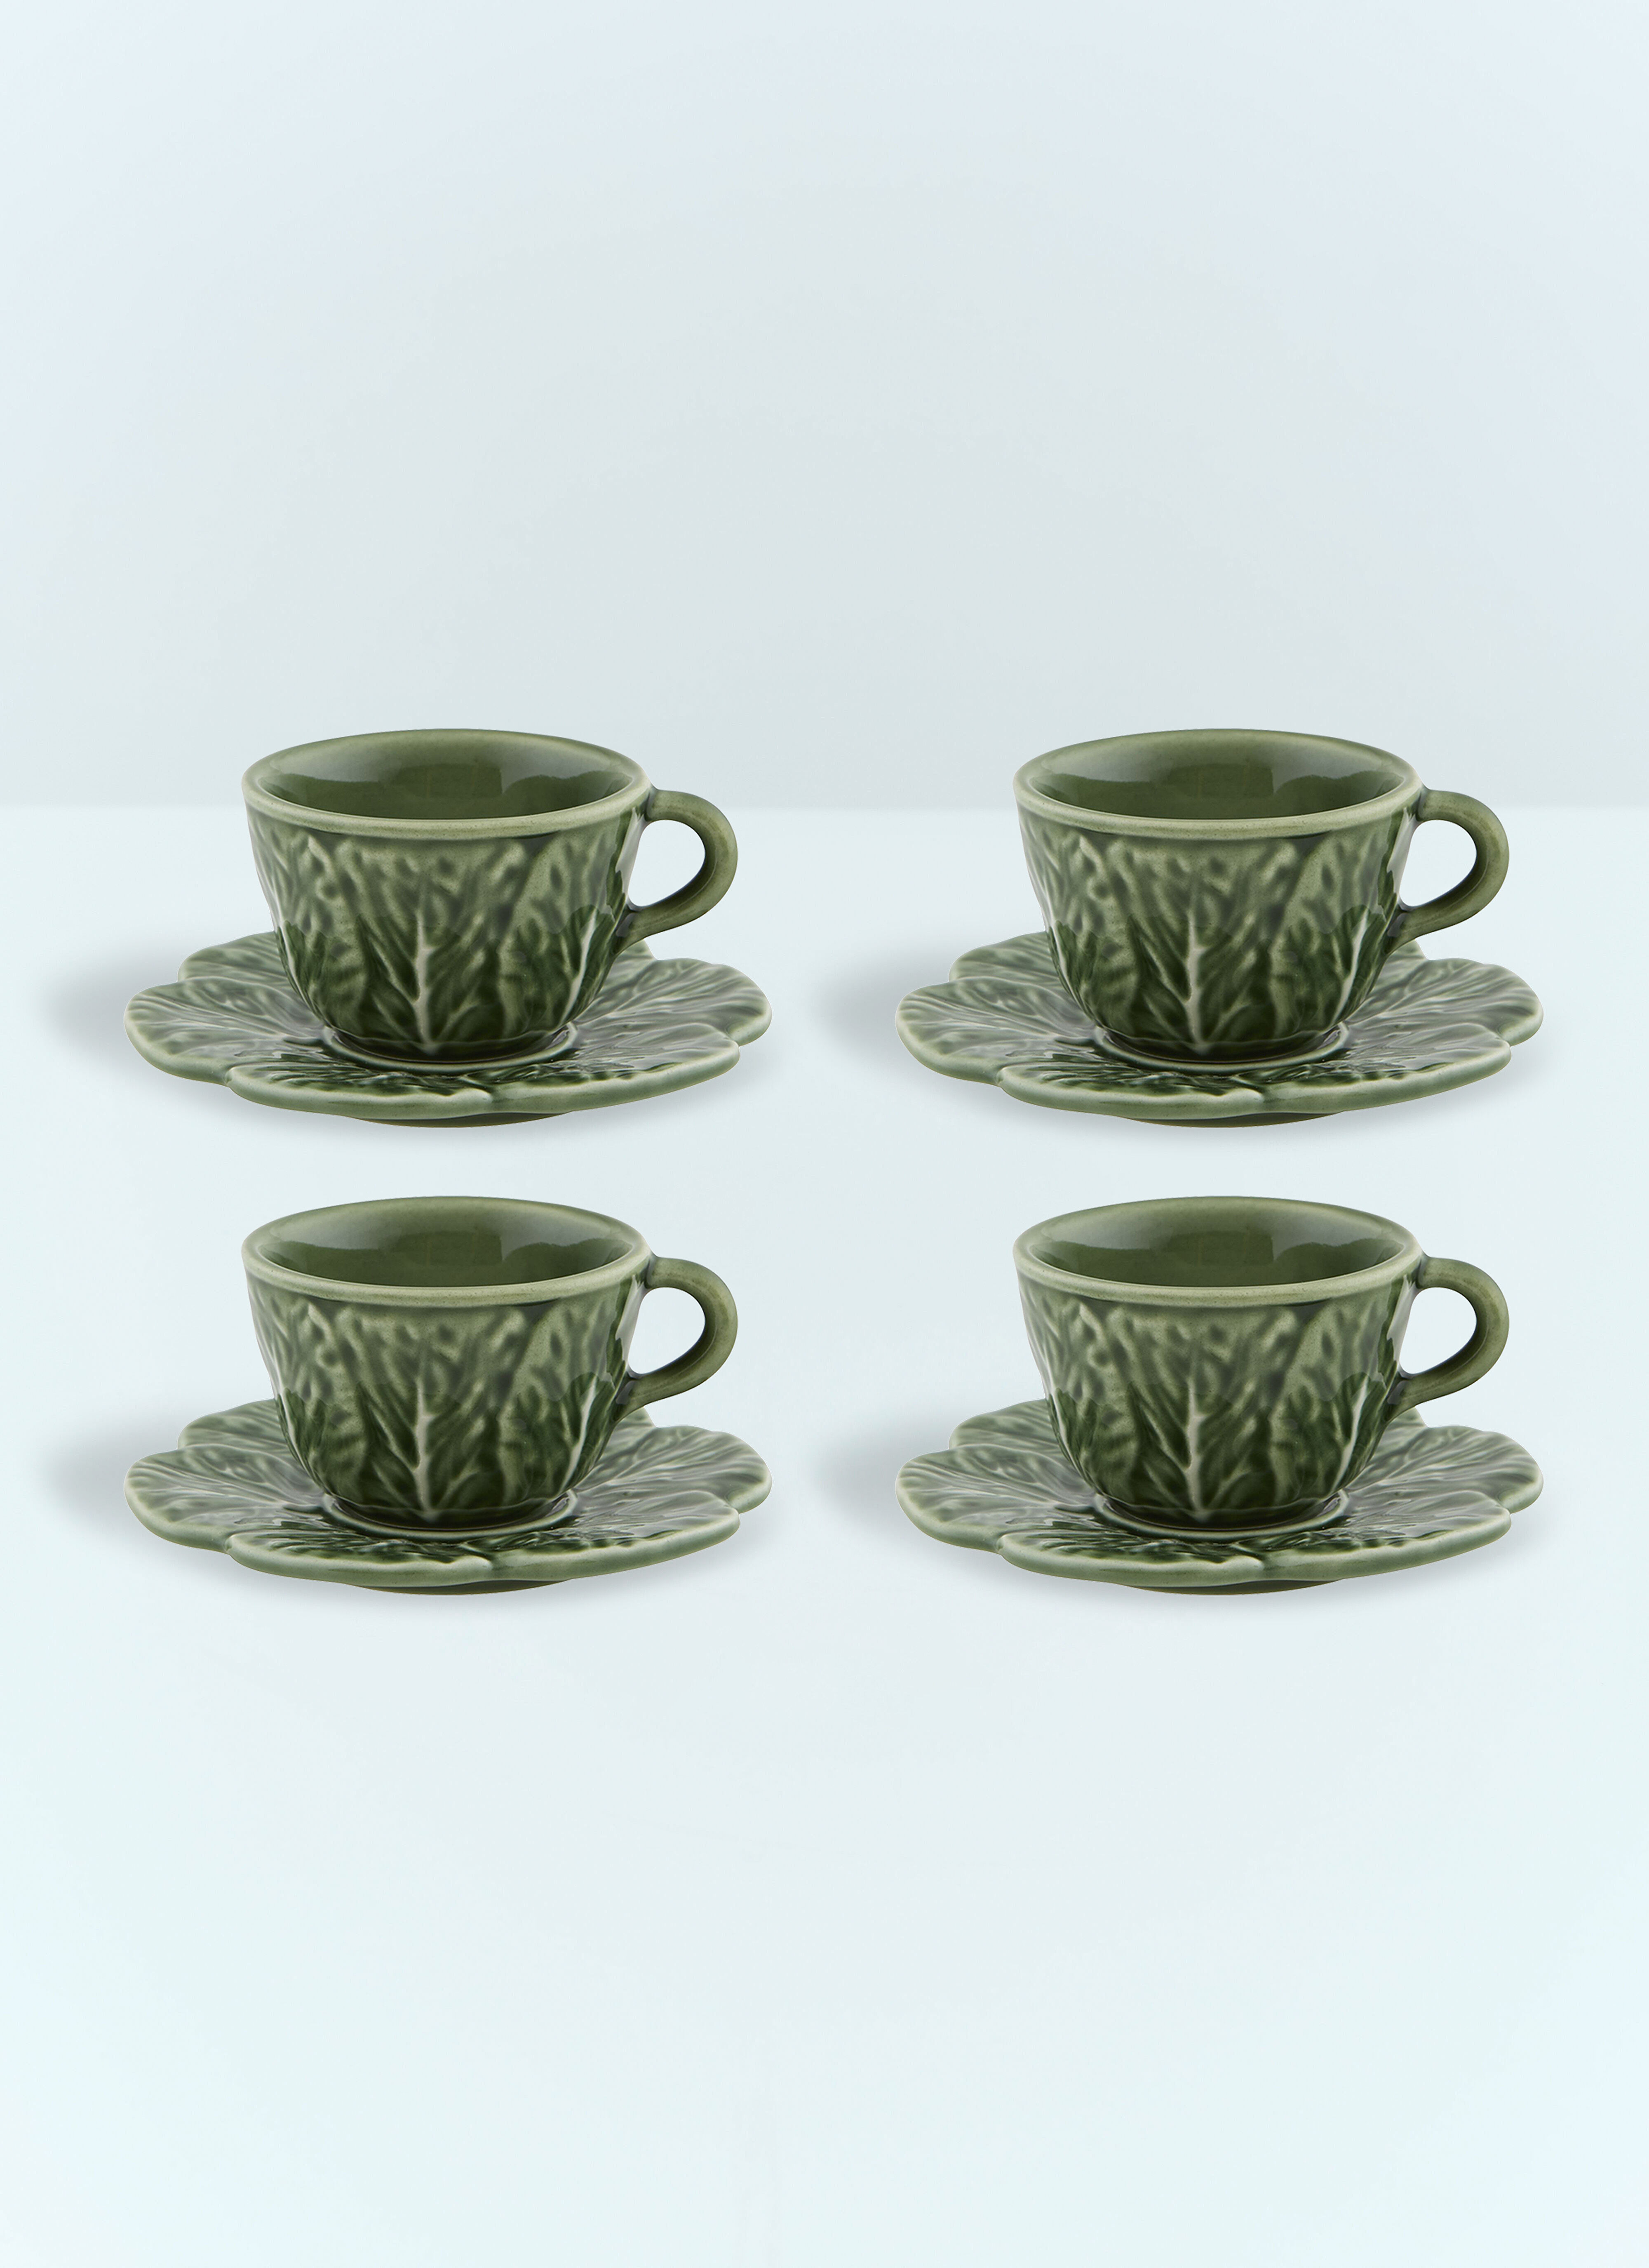 Bordallo Pinheiro Set Of Four Couve Coffee Cups And Saucers Green wps0691201